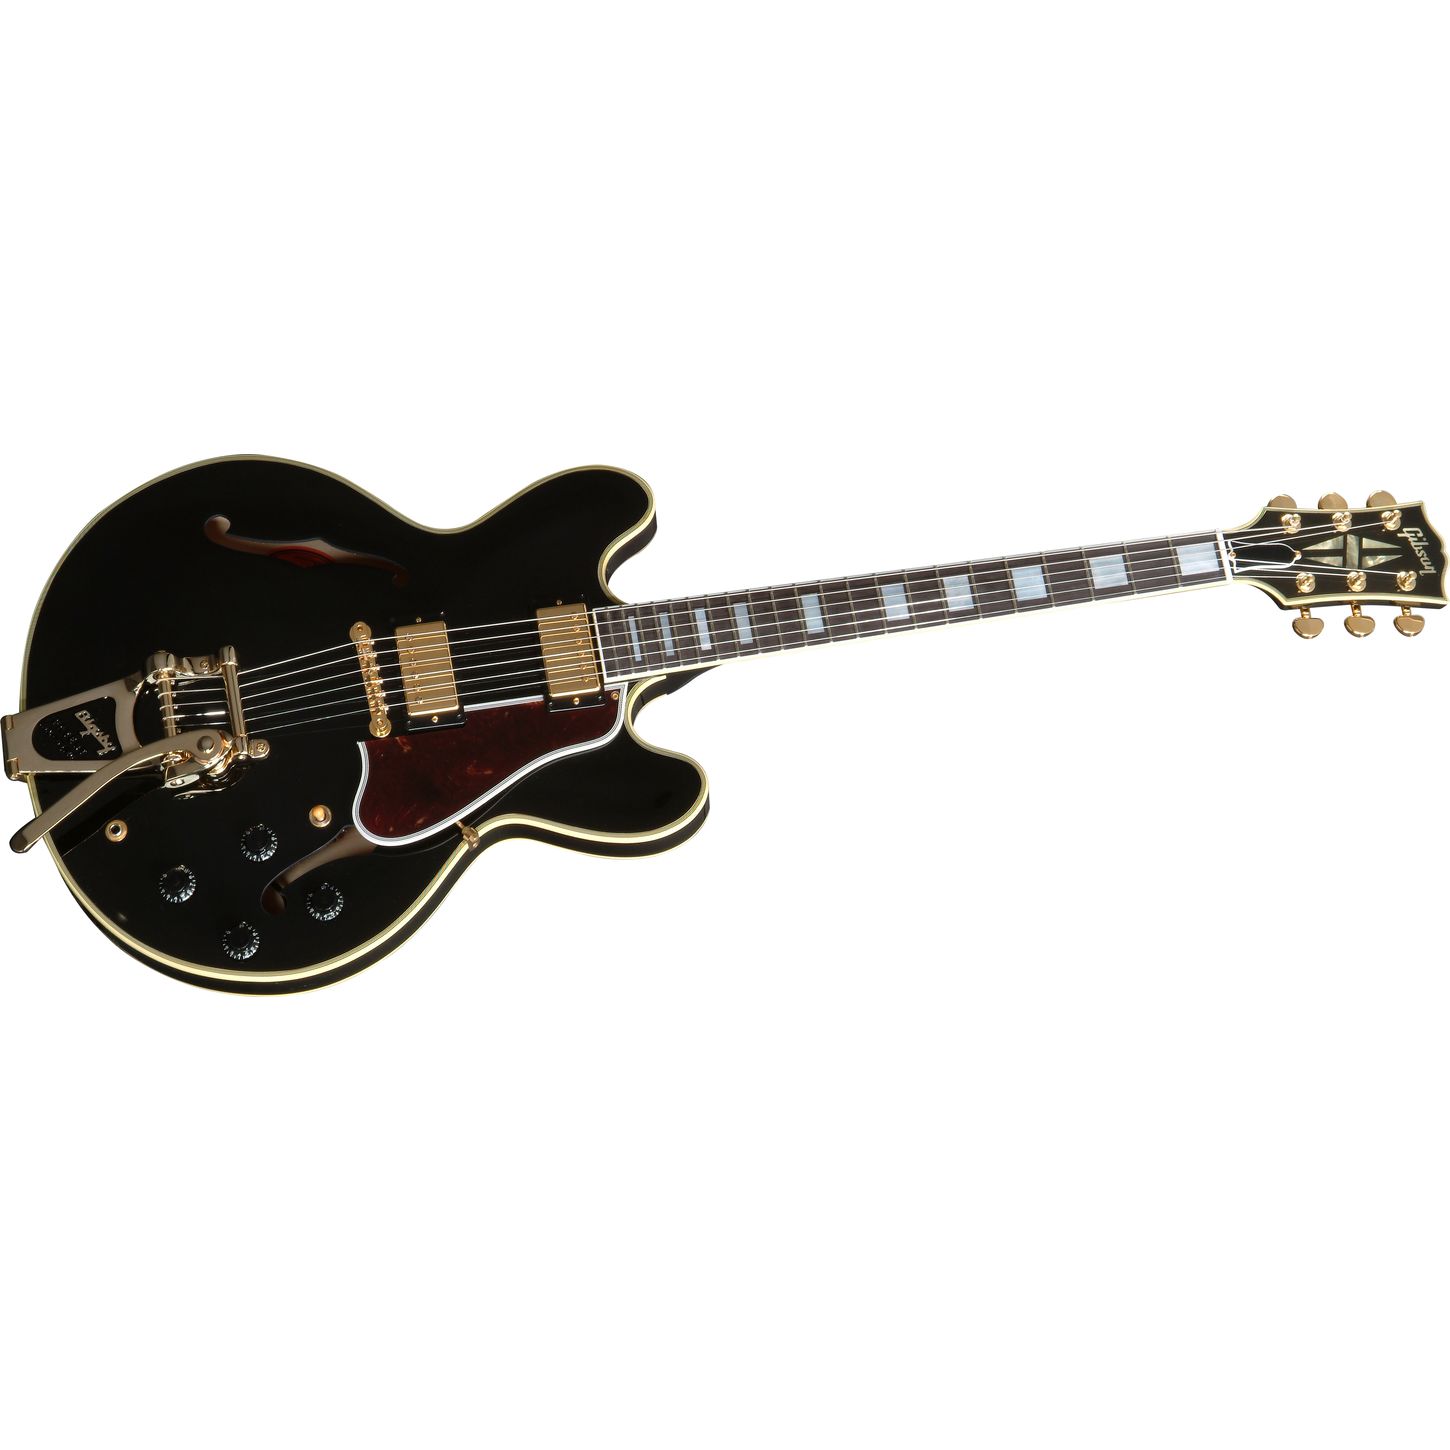 Gibson Guitar 26618 Hd Wallpapers in Music   Imagescicom